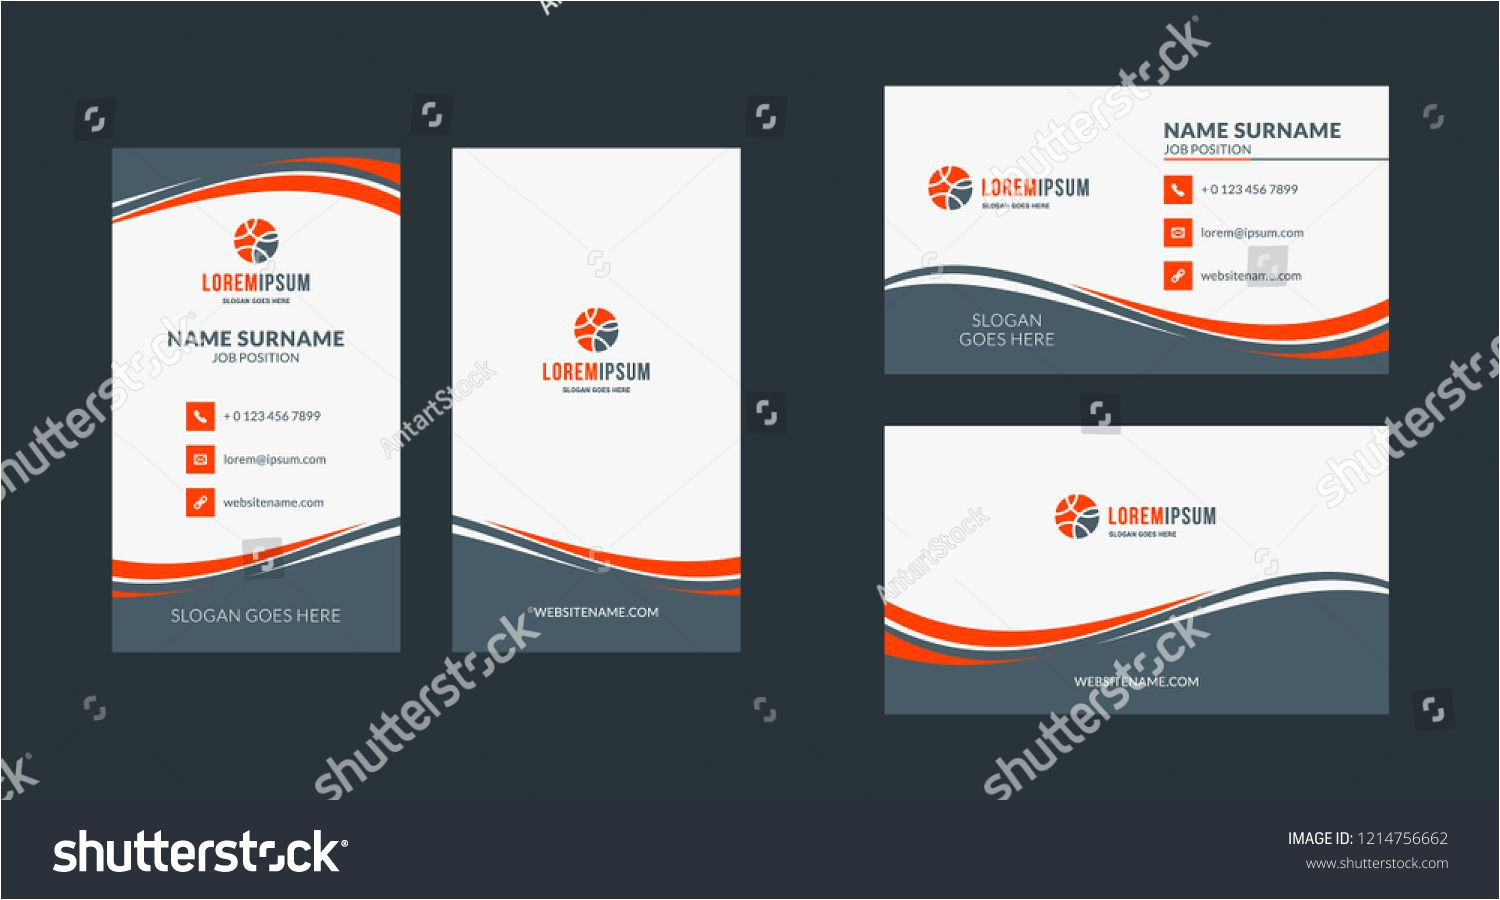 Beautiful Name Card Design Vector Double Sided Creative Business Card Template Portrait and